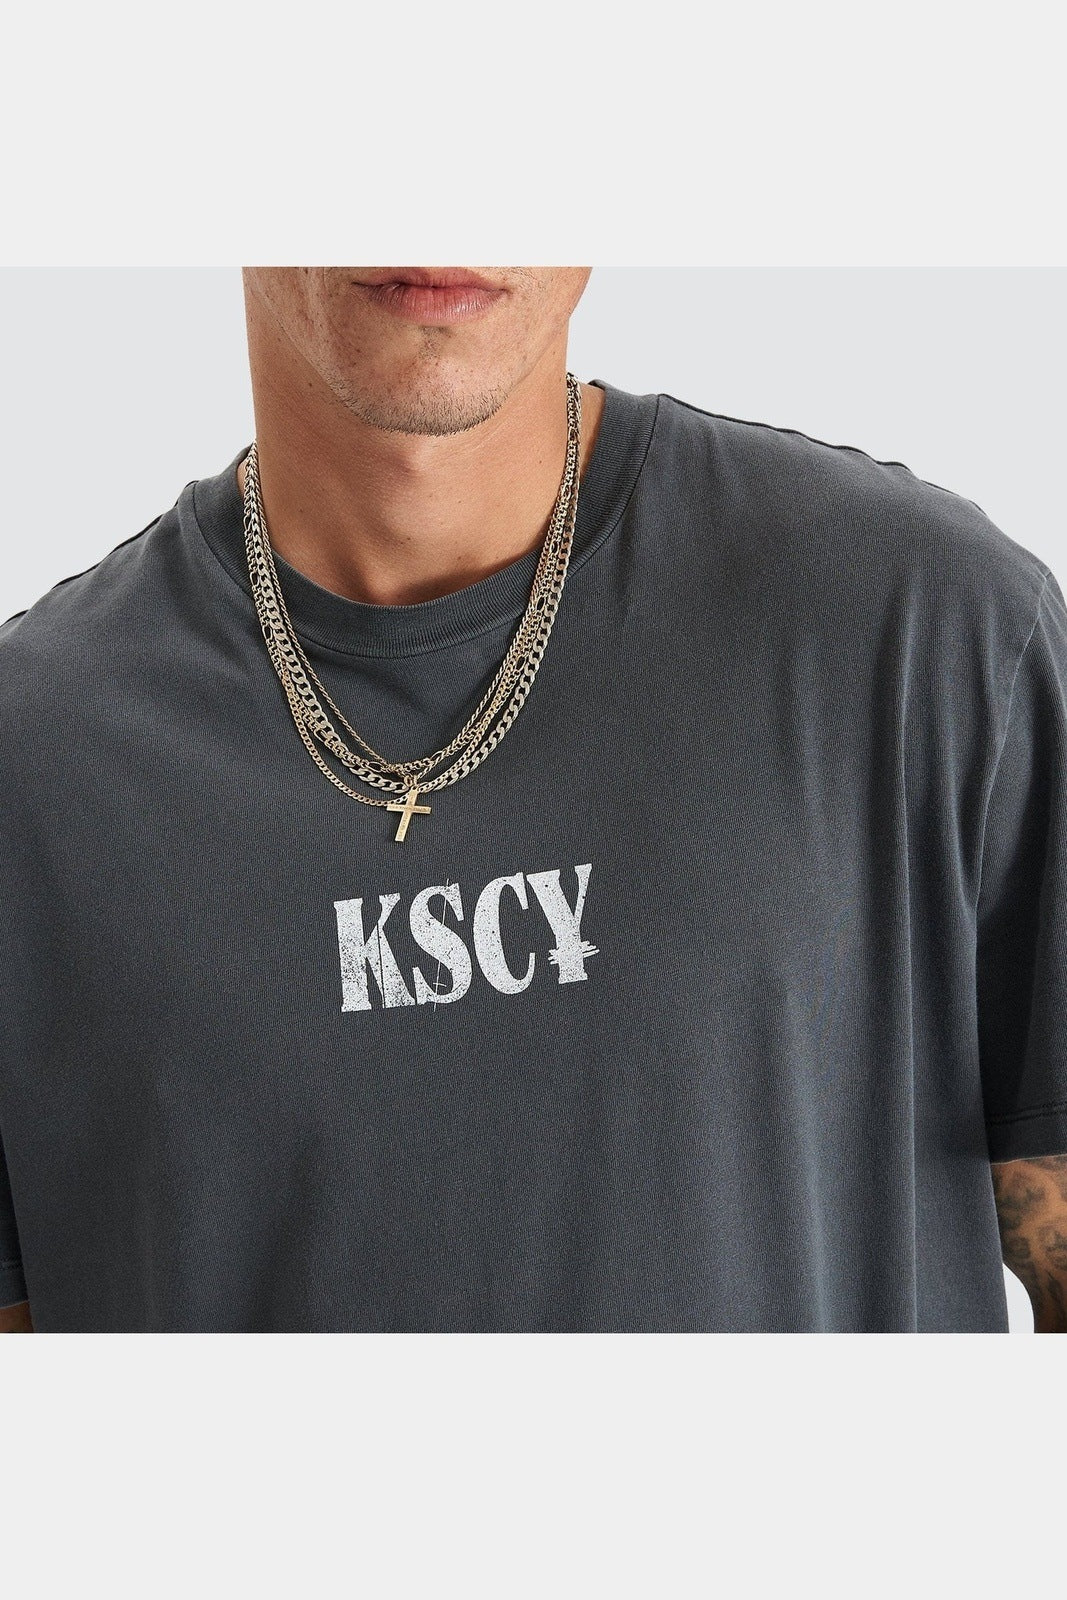 KISS CHACEY - anahem relaxed tee - pigment asphalt